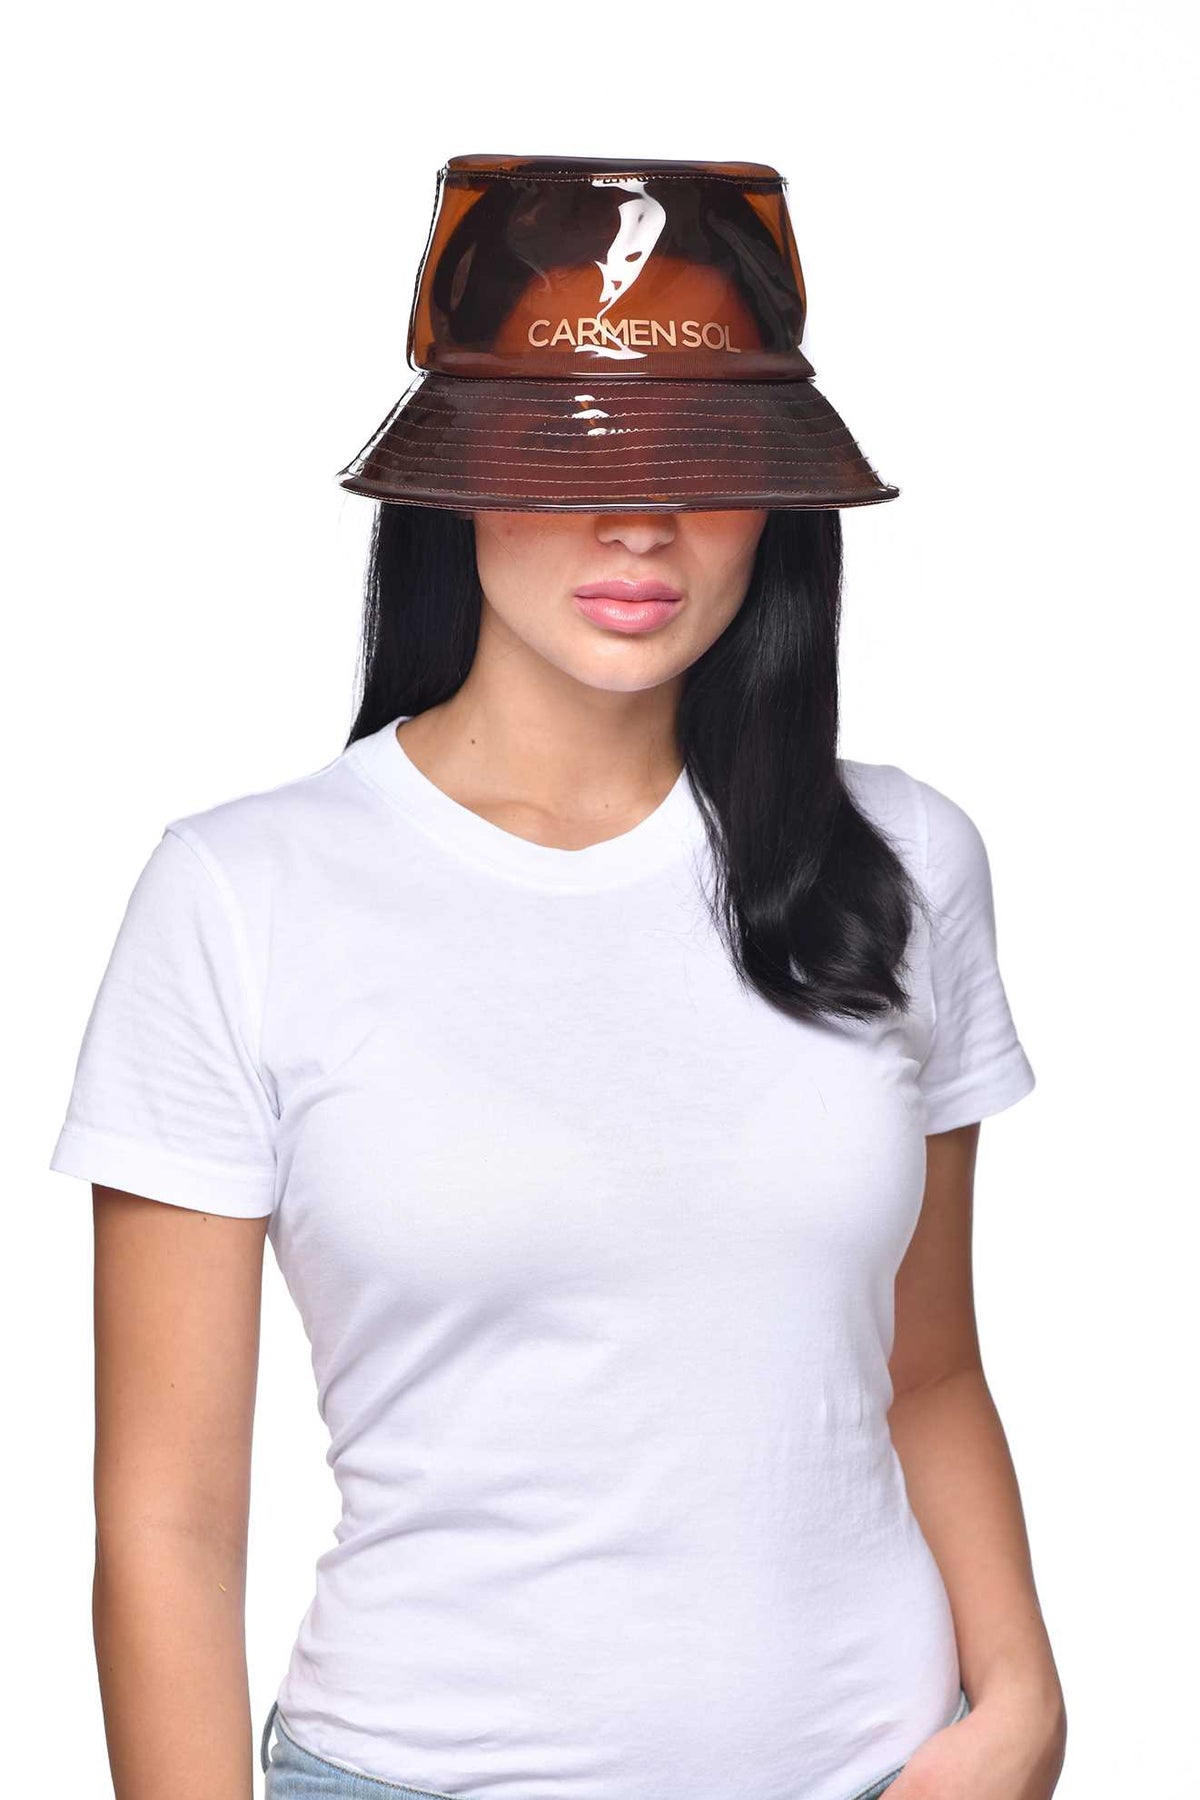 Made in Italy womens bucket hat in color brown from Carmen Sol